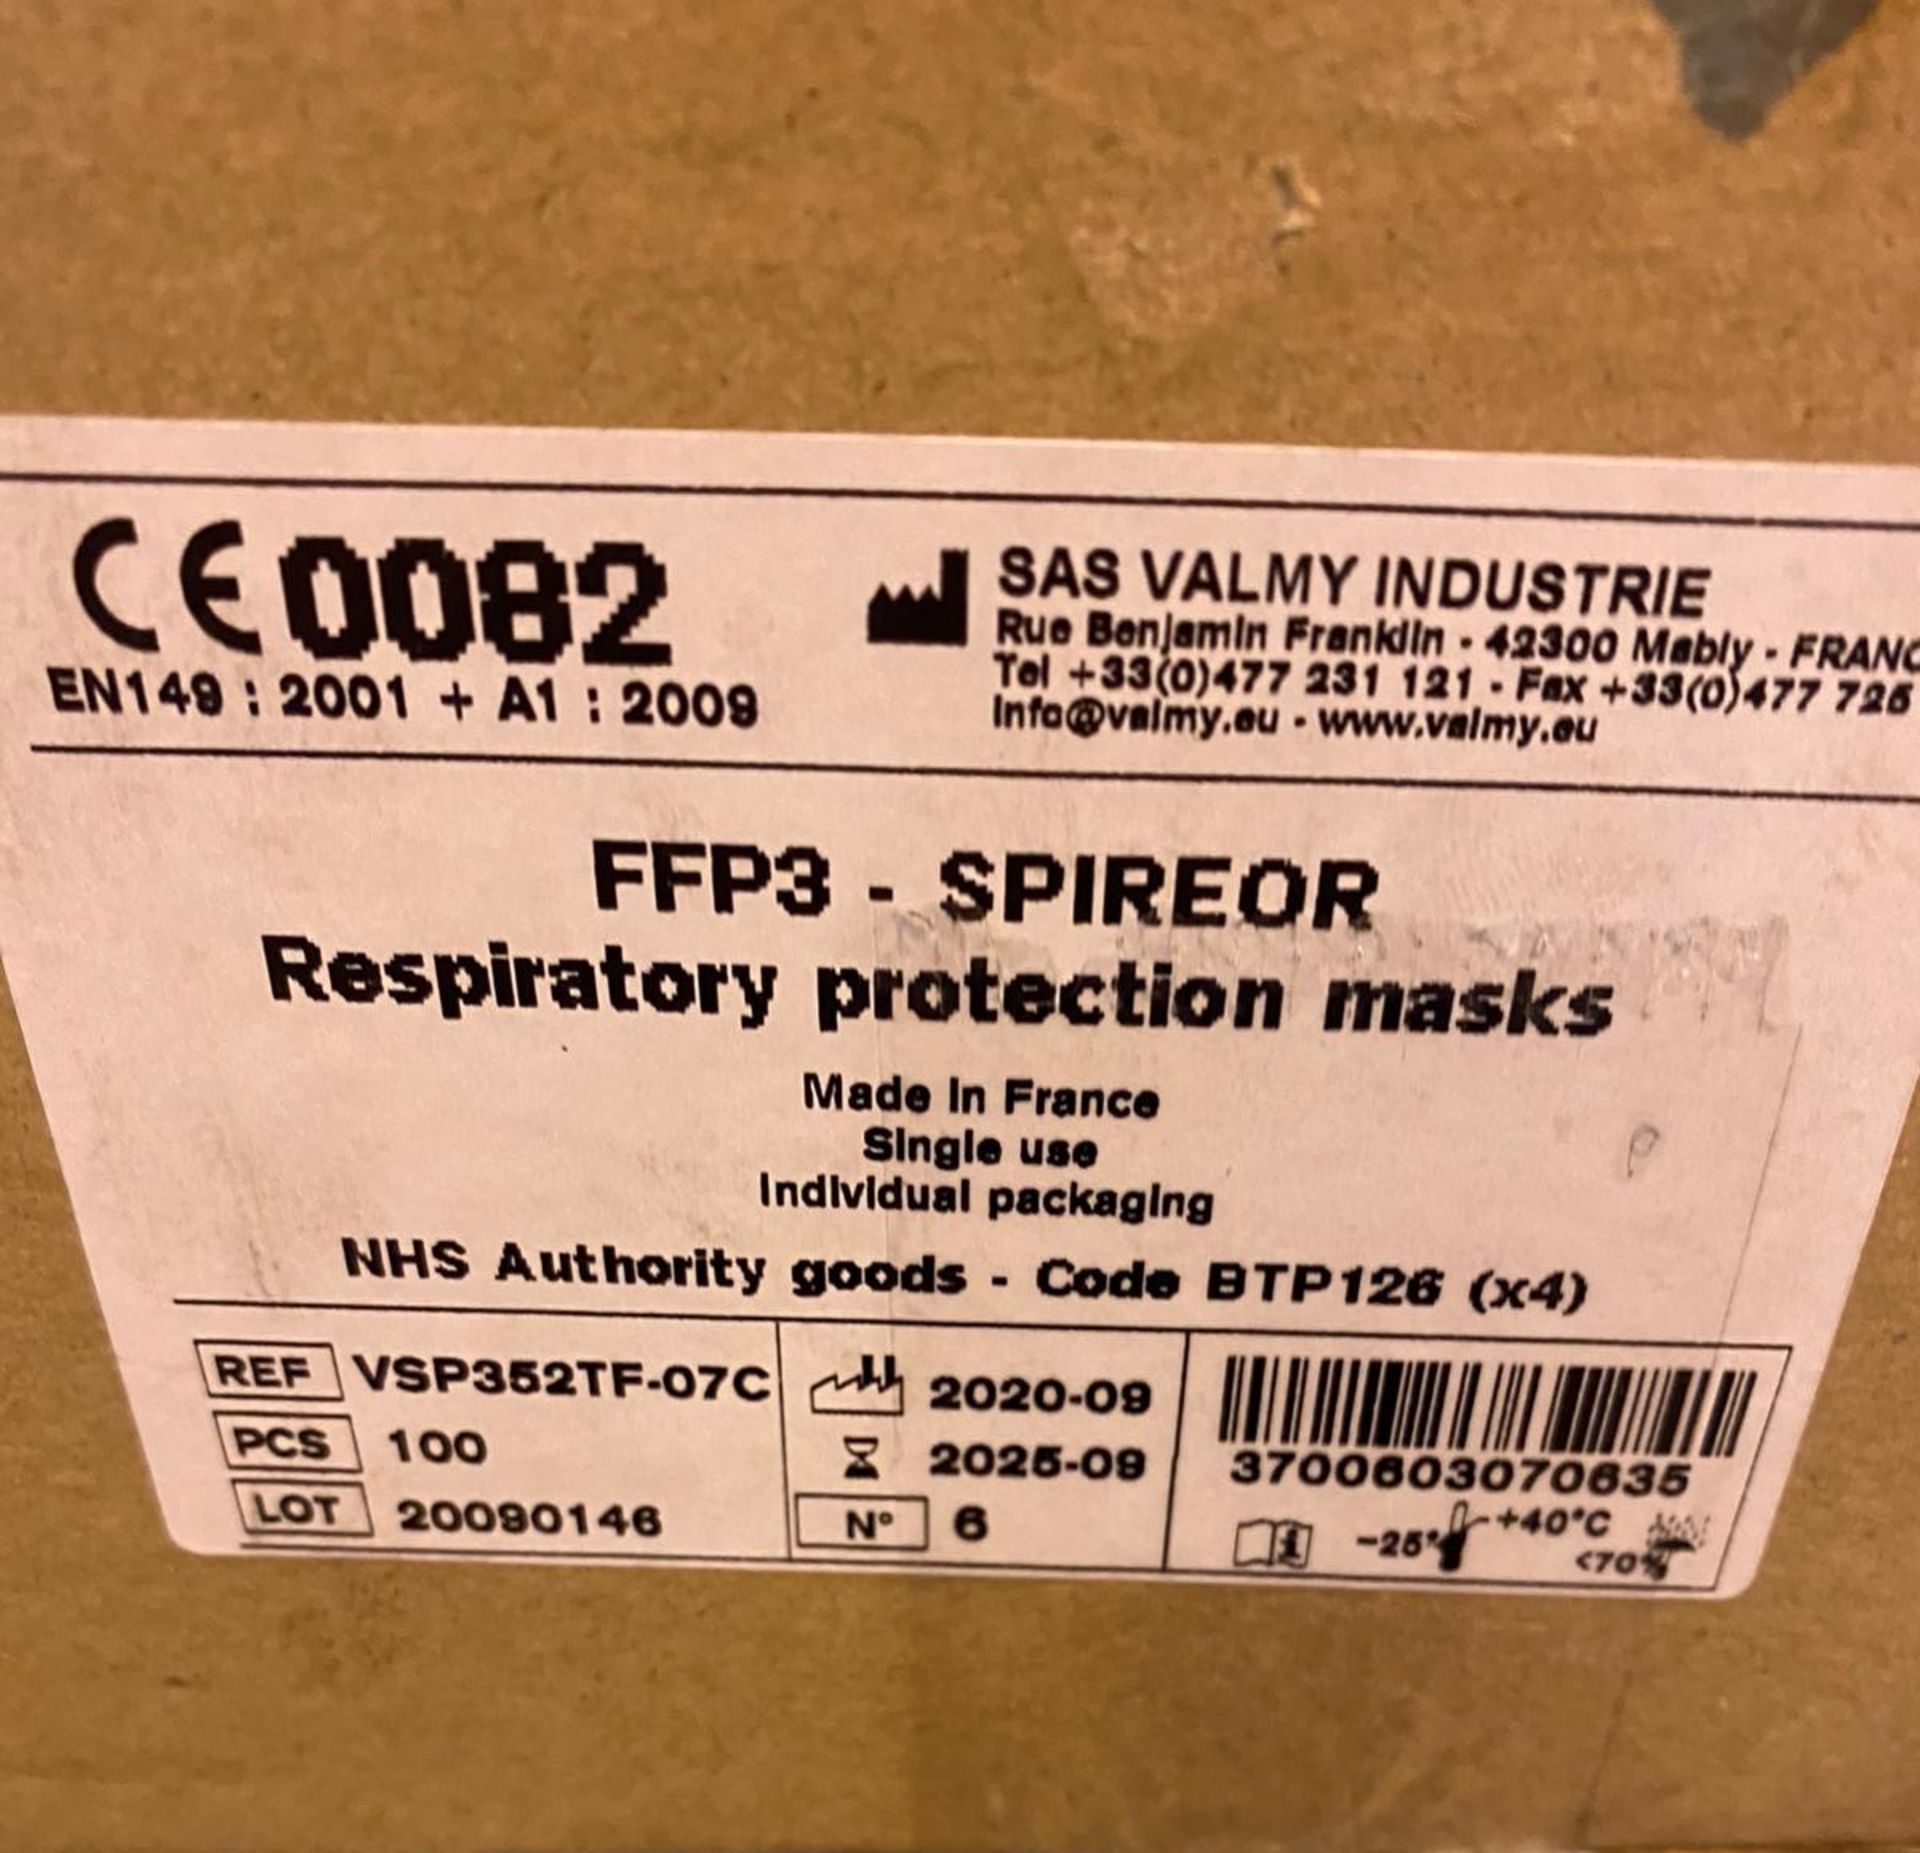 1,000 x Valmy Spireor Resparitory FFP3 Face Masks - NHS Approved - Stock Code VSP352TF-07C - New - Image 4 of 7